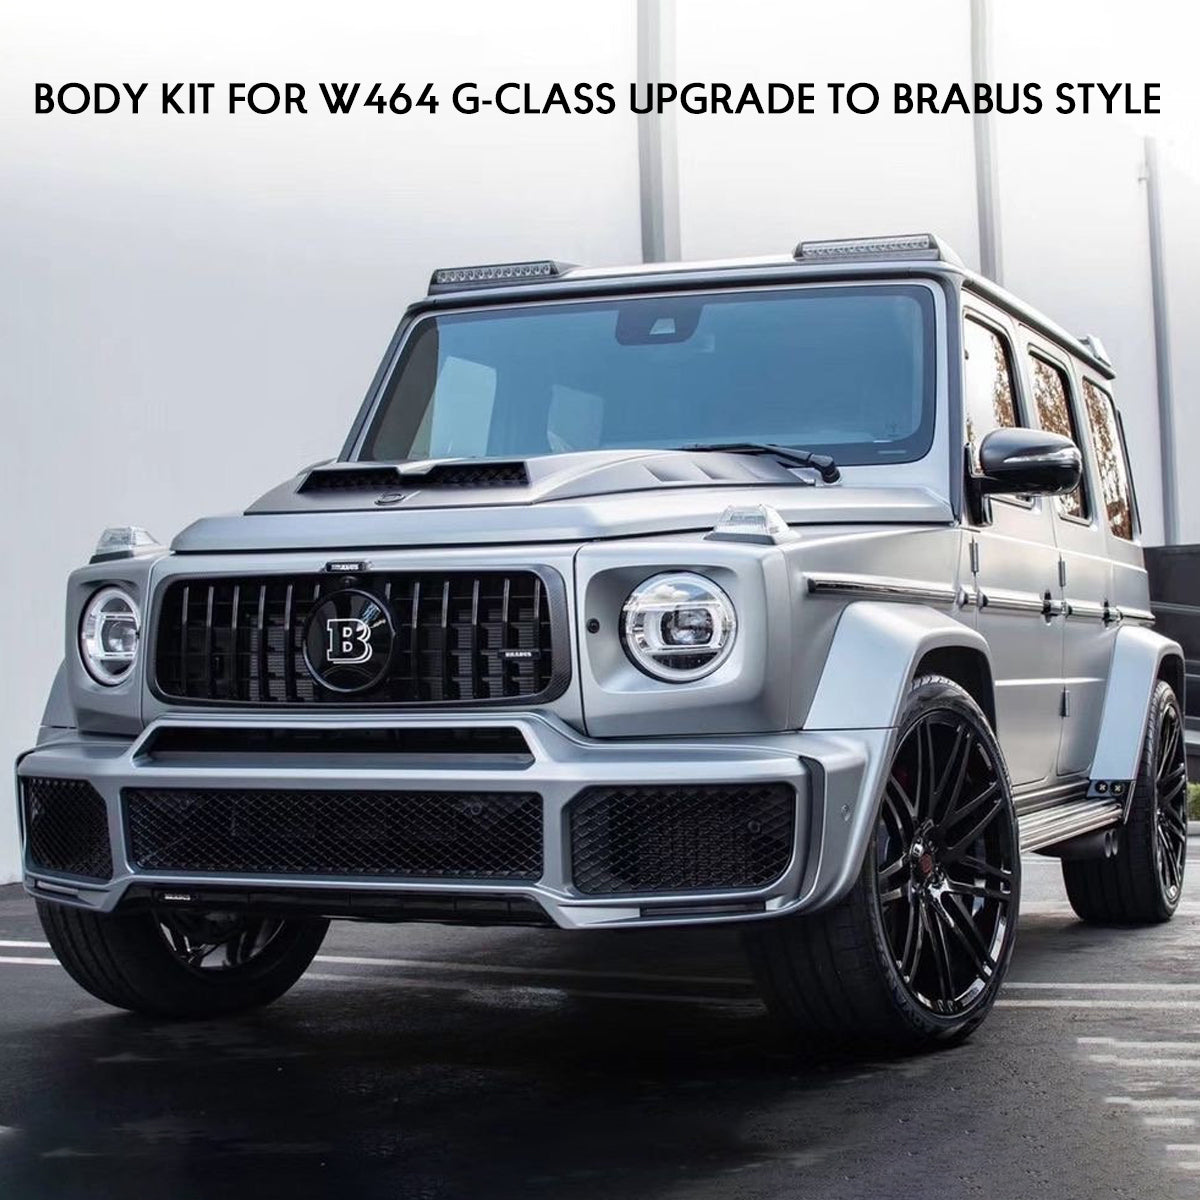 BODY KIT FOR W464 G-CLASS UPGRADE TO BRABUS STYLE